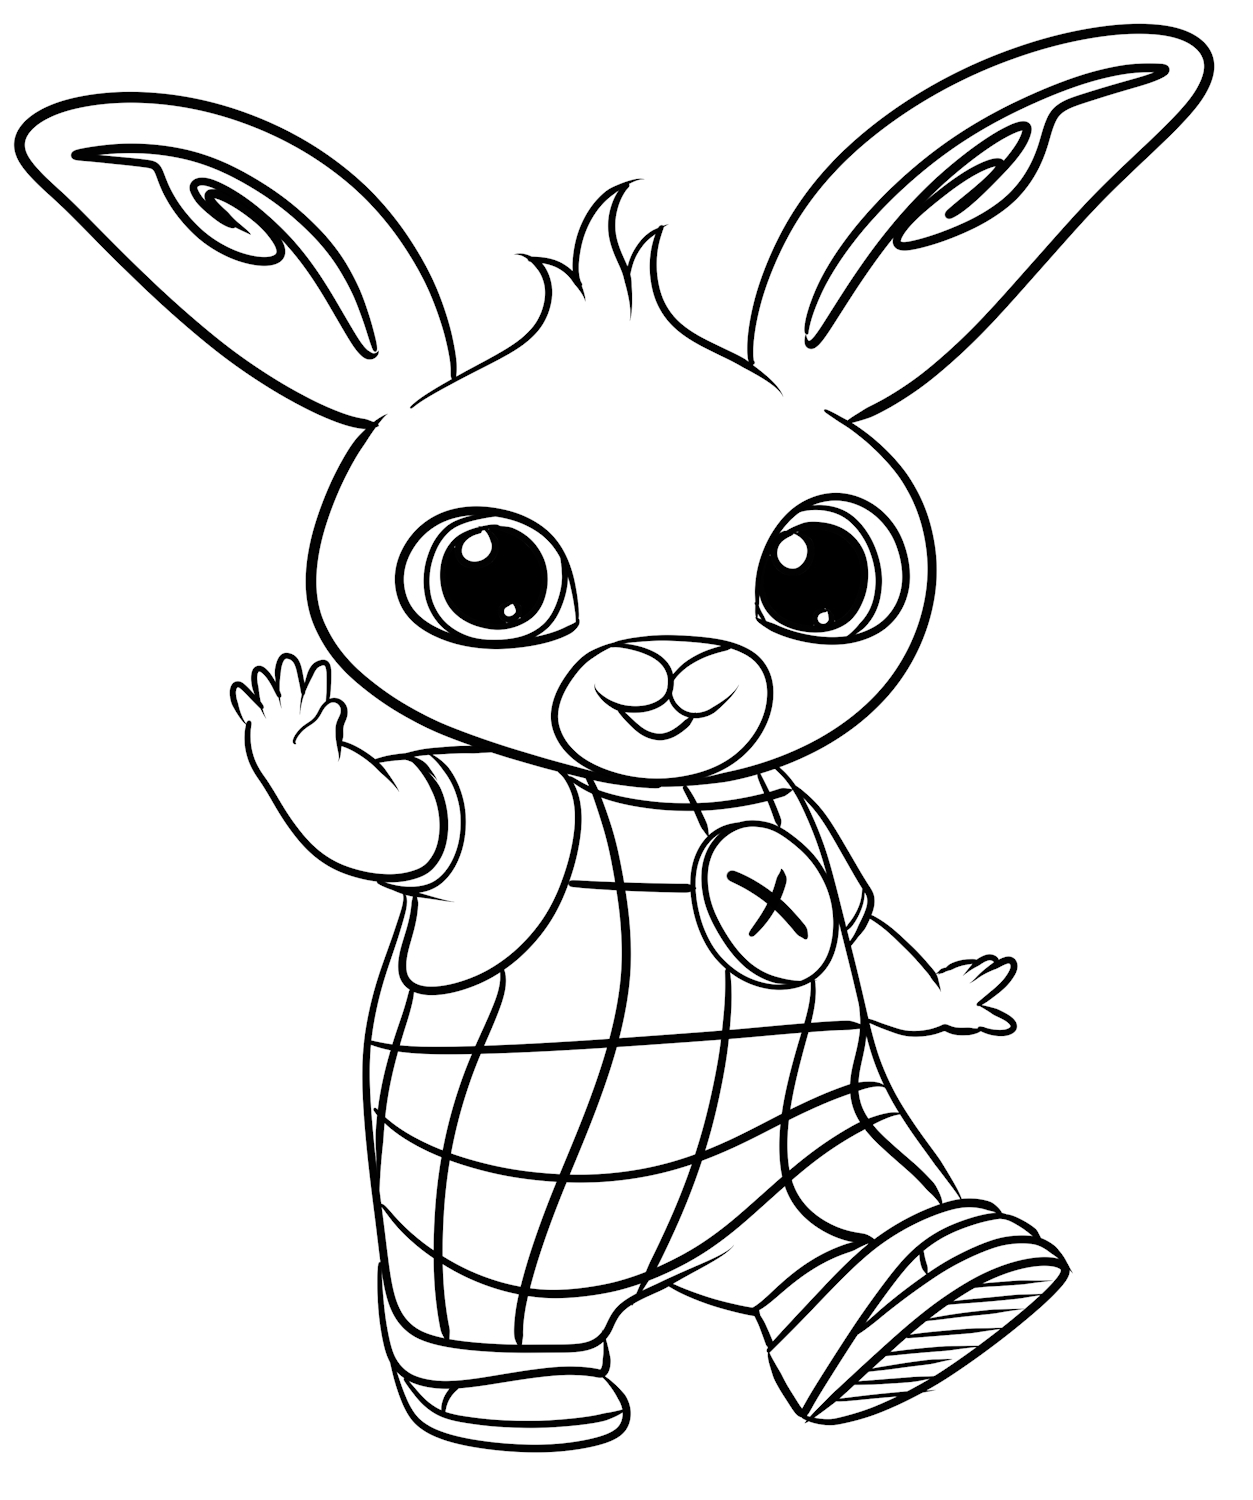 Bing coloring page to print and color